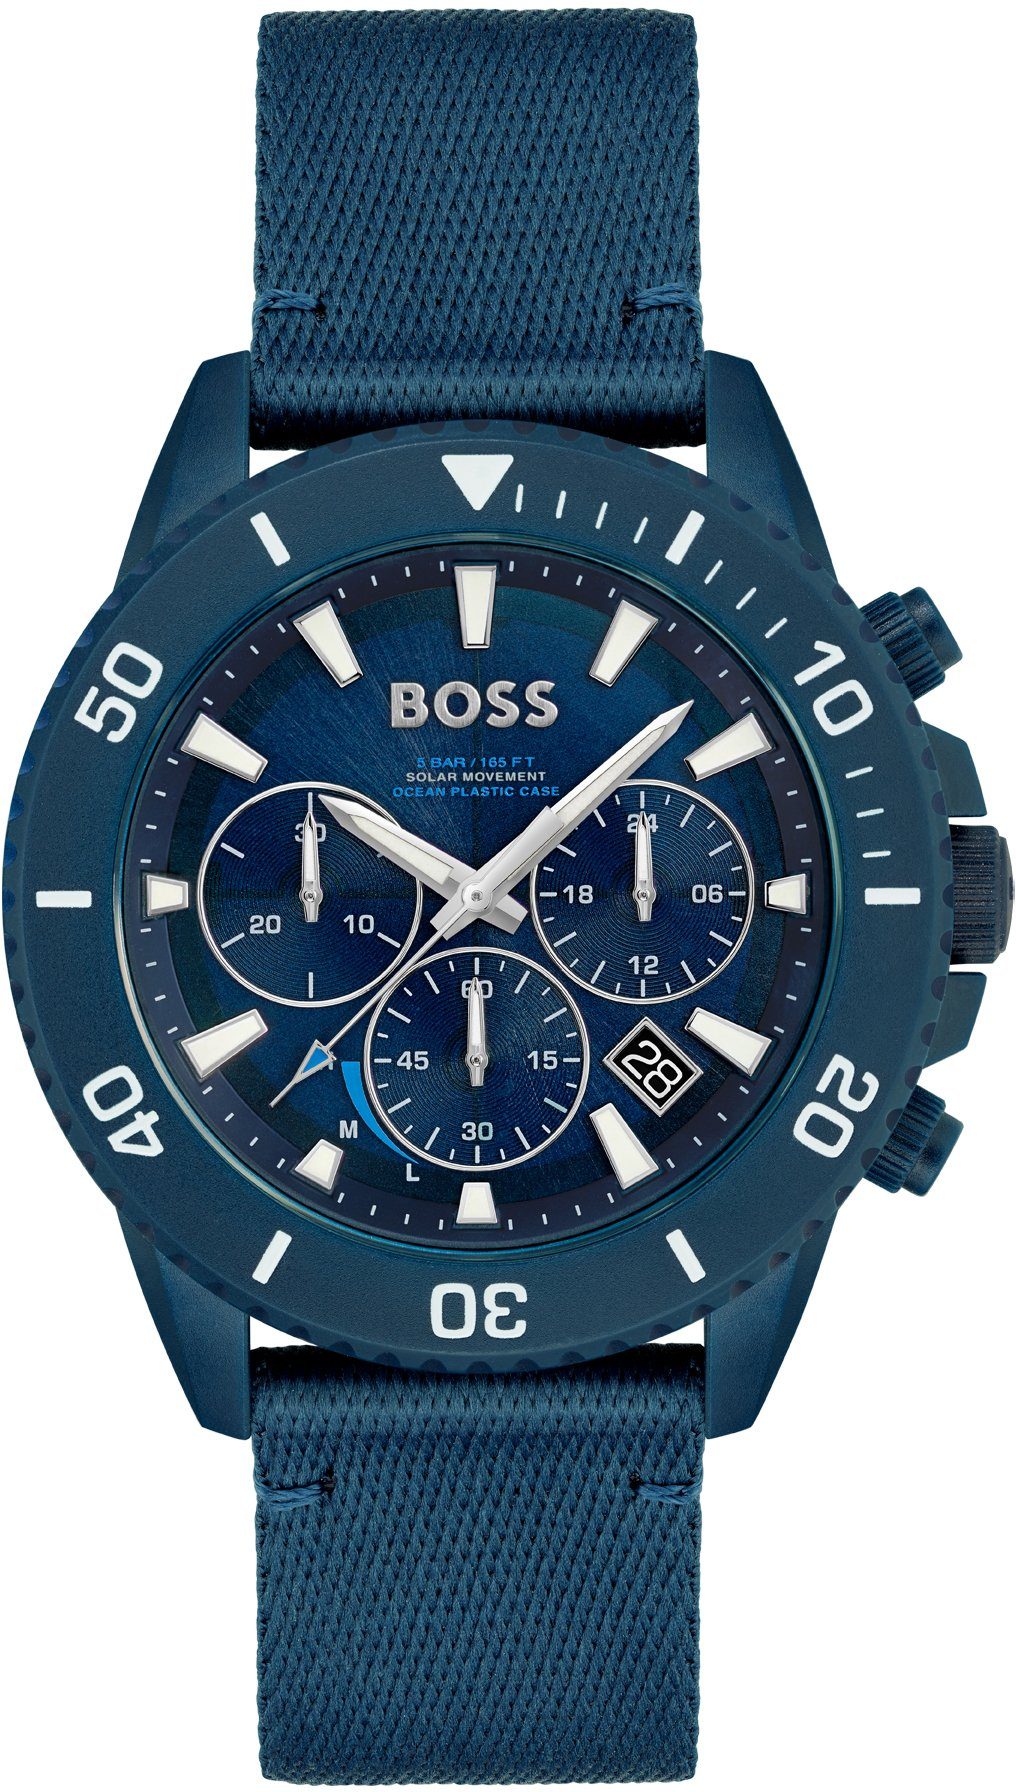 【Hergestellt in Japan】 BOSS Chronograph Admiral Sustainable #tide, 1513919